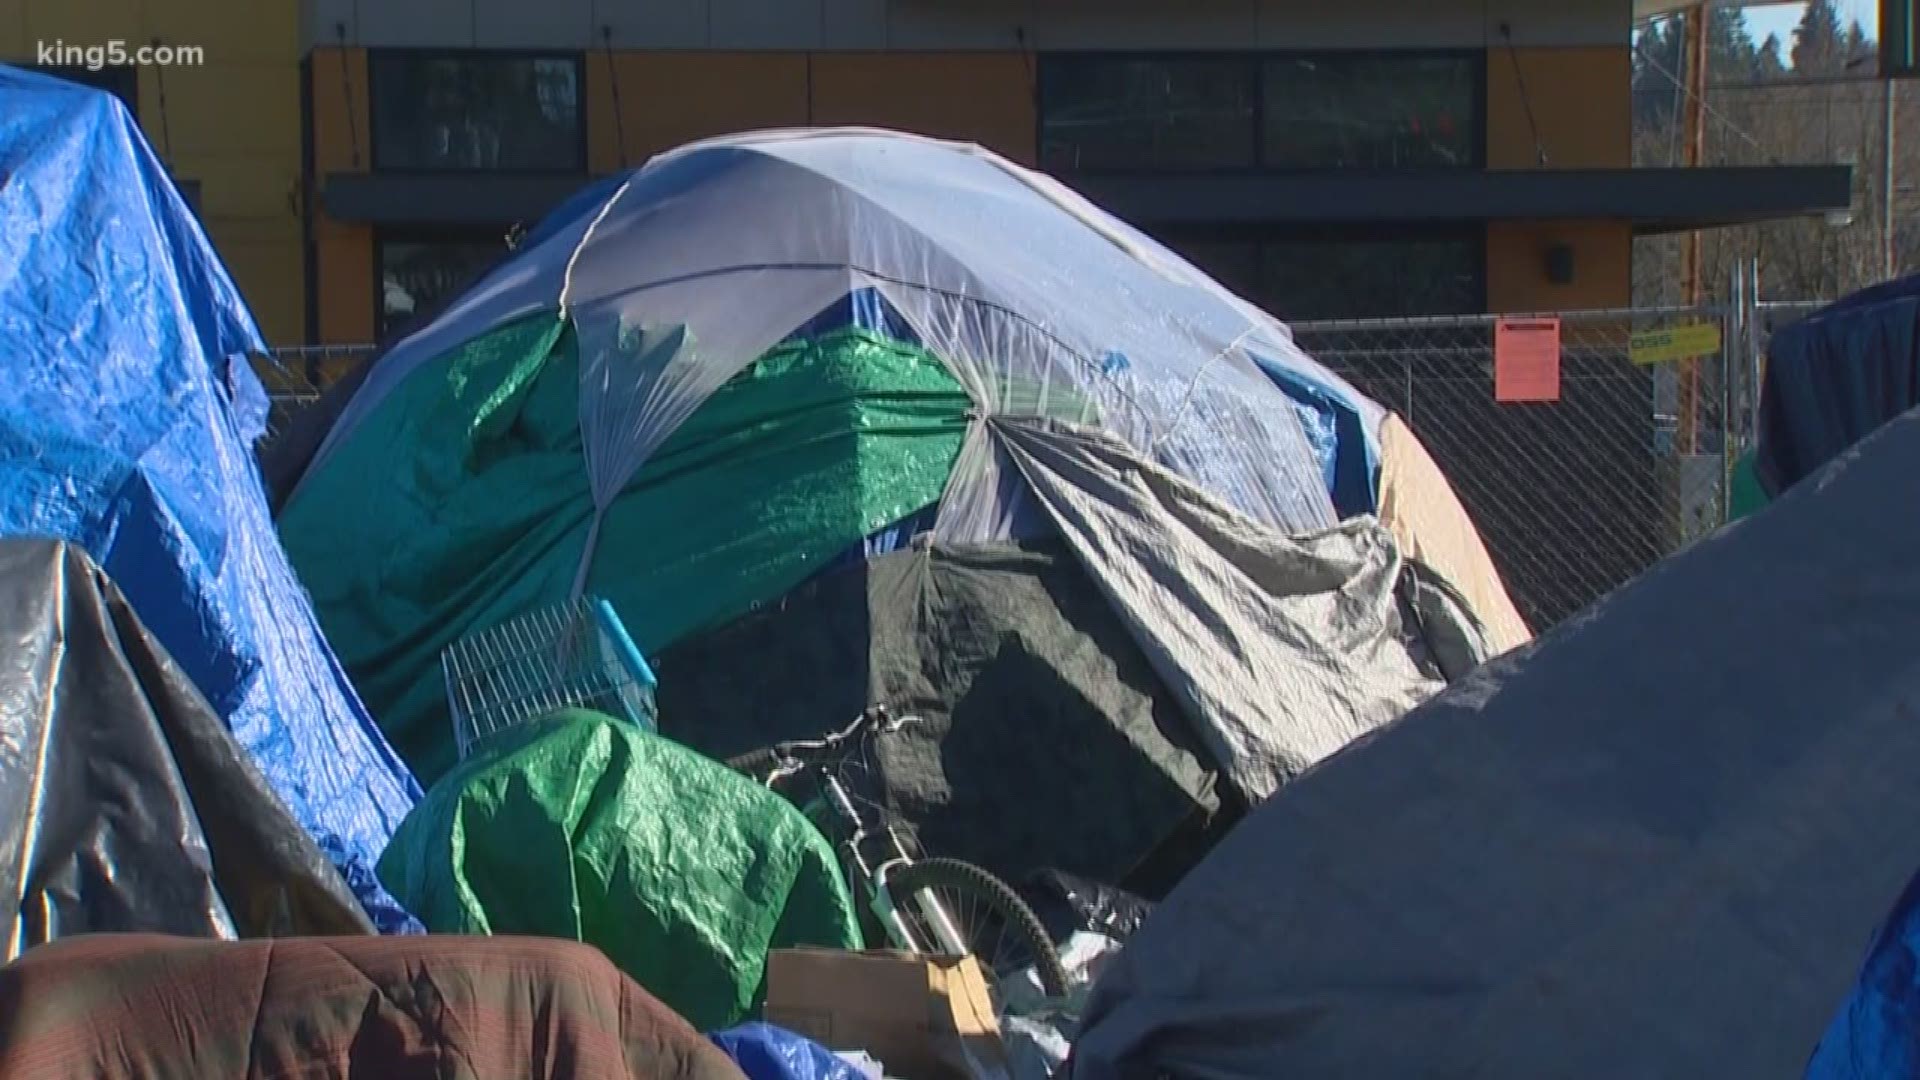 Seattle Mayor Jenny Durkan says a new legal entity to address the region's homeless issue could reduce duplication and inefficiencies for many cities.